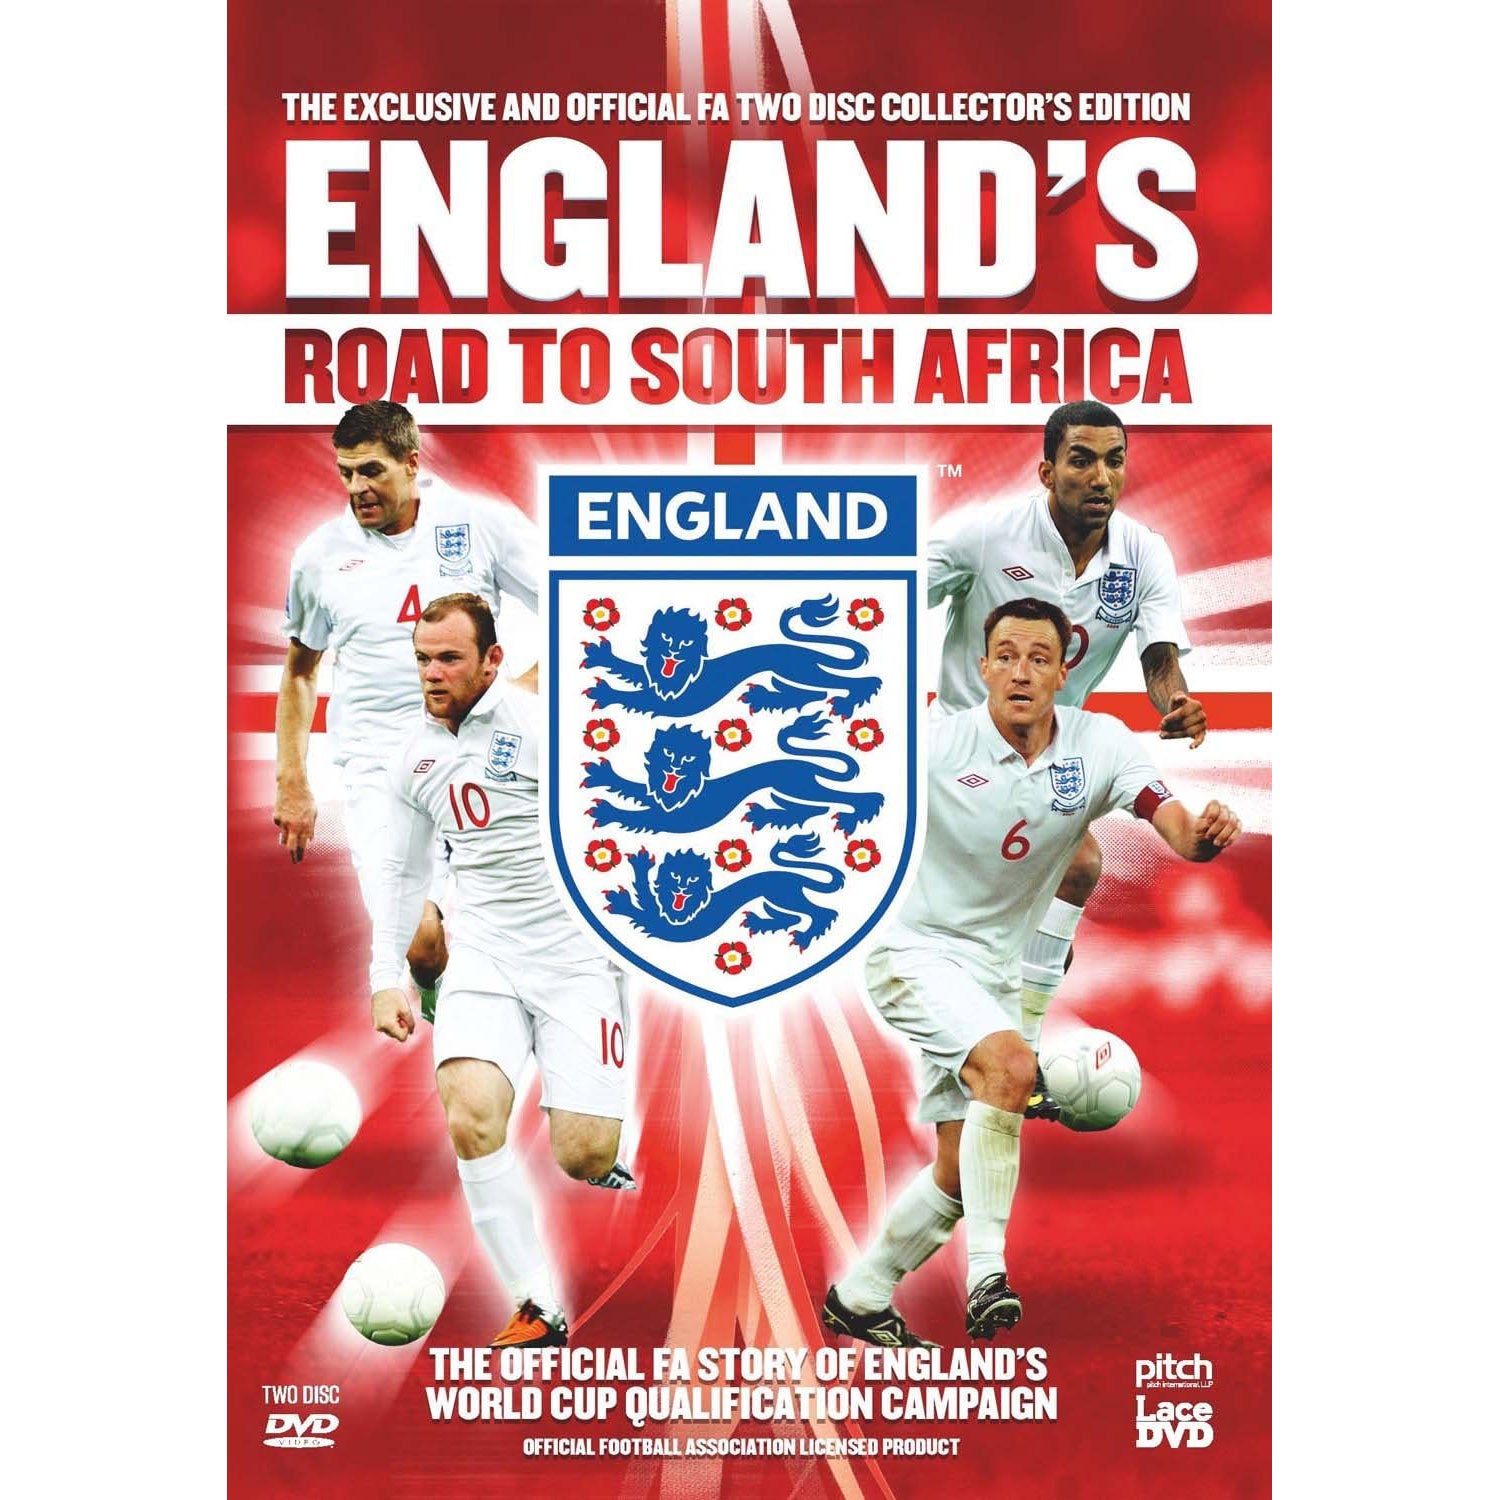 England's Road to South Africa – 2010 World Cup Qualification Campaign